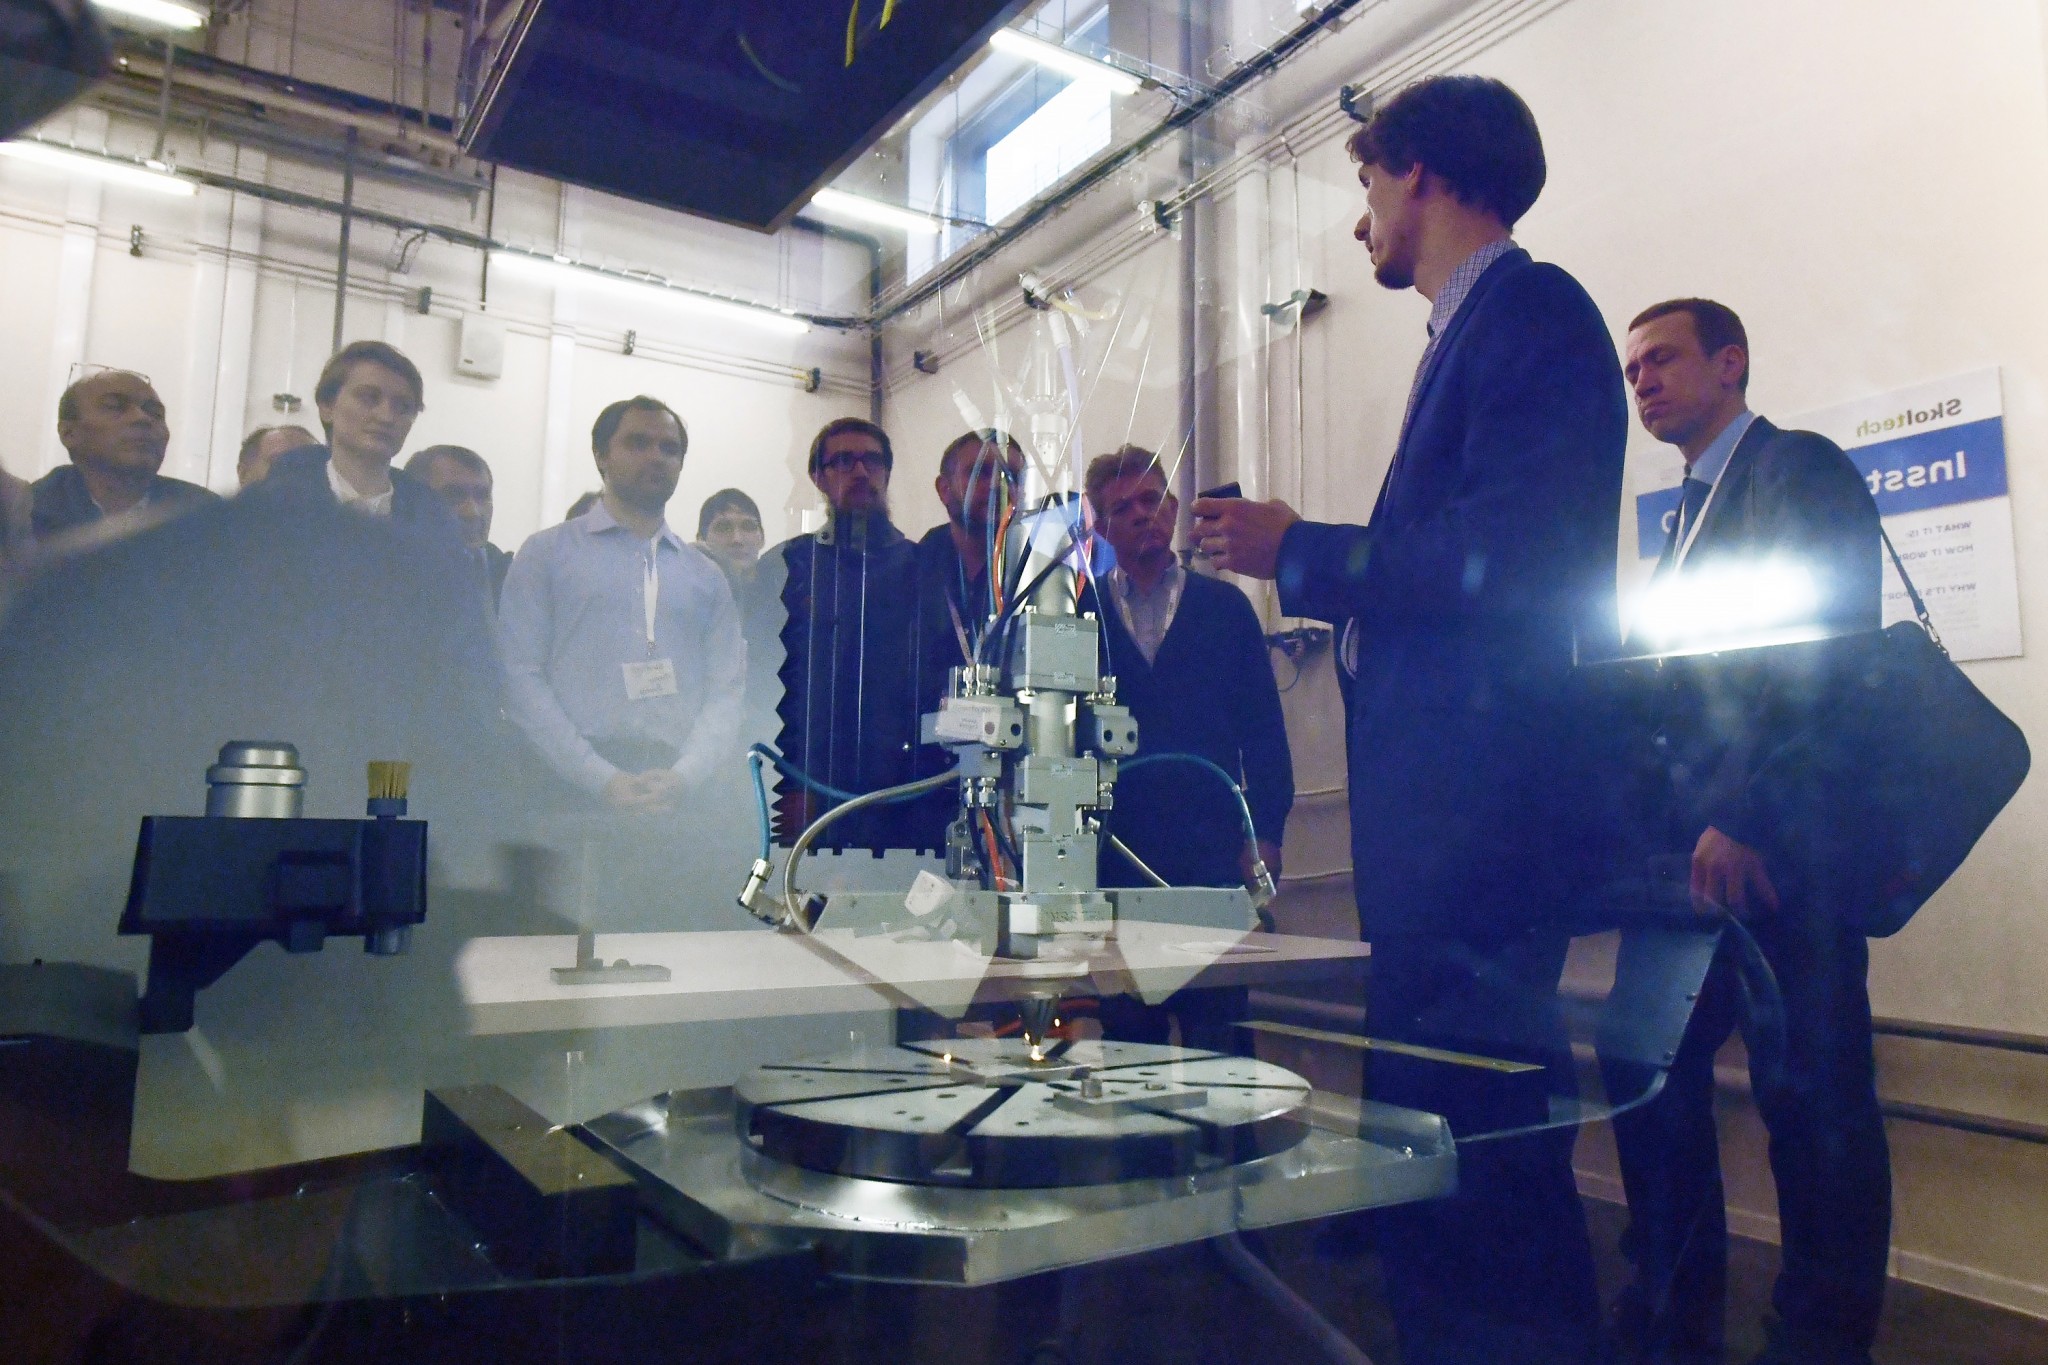 Visitors tour the institute's new Additive Manufacturing Laboratory. Photo: Skoltech.